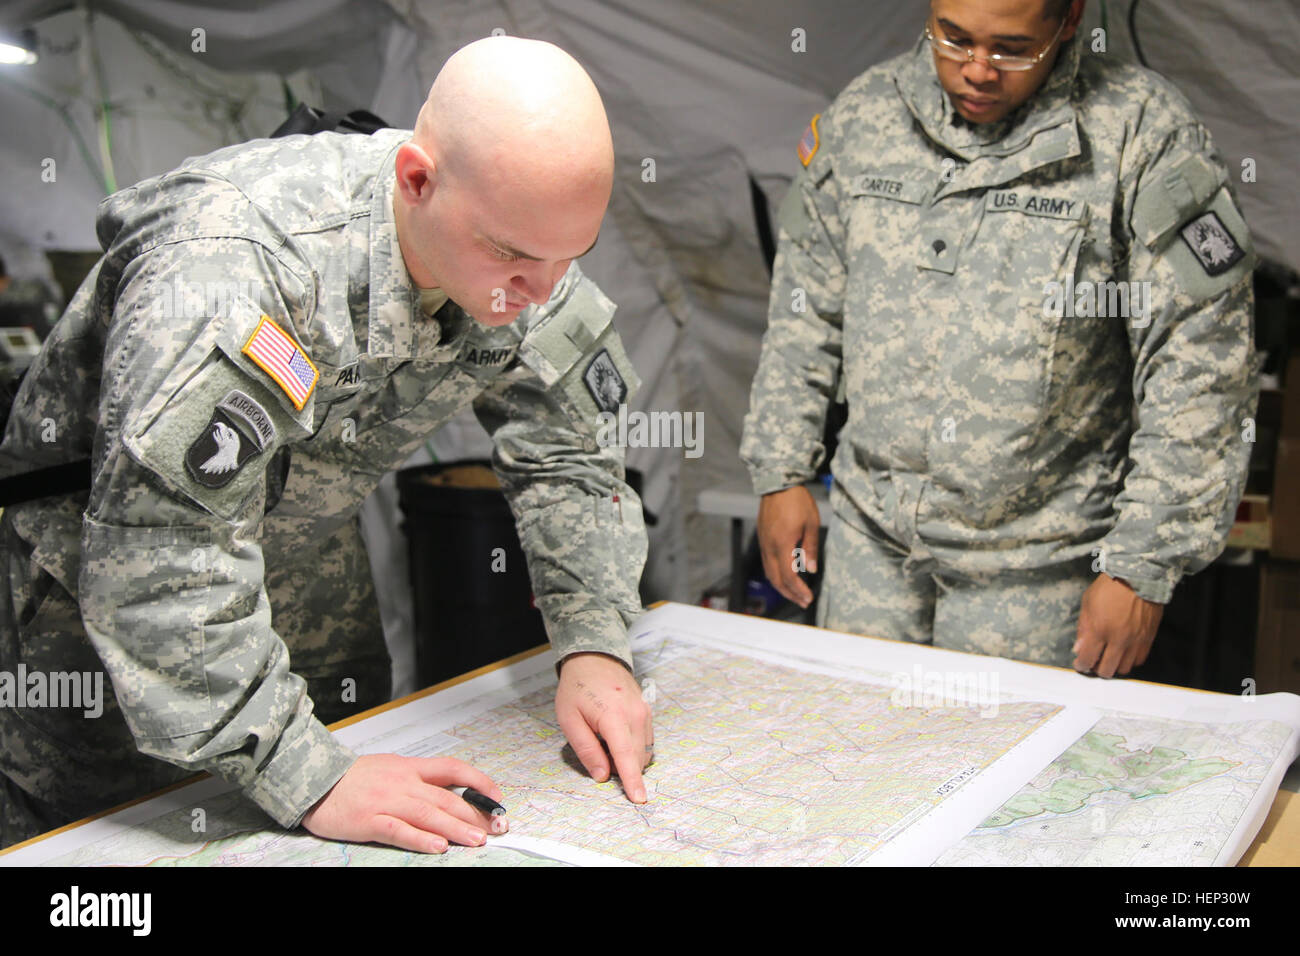 U.S. Army Sgt. Luke Park, left, and Spc. Derrick Carter of 2nd Battalion, 159th Aviation Regiment, 12th Combat Aviation Brigade review terrain features on a map during exercise Allied Spirit I at the Joint Multinational Readiness Center in Hohenfels, Germany, Jan. 20, 2015. Exercise Allied Spirit includes more than 2,000 participants from Canada, Hungary, Netherlands, United Kingdom, and the U.S. Allied Spirit is exercising tactical interoperability and testing secure communications within Alliance members. (U.S. Army photo by Spc. Justin De Hoyos/Released) Allied Spirit I 150120-A-RJ750-001 Stock Photo